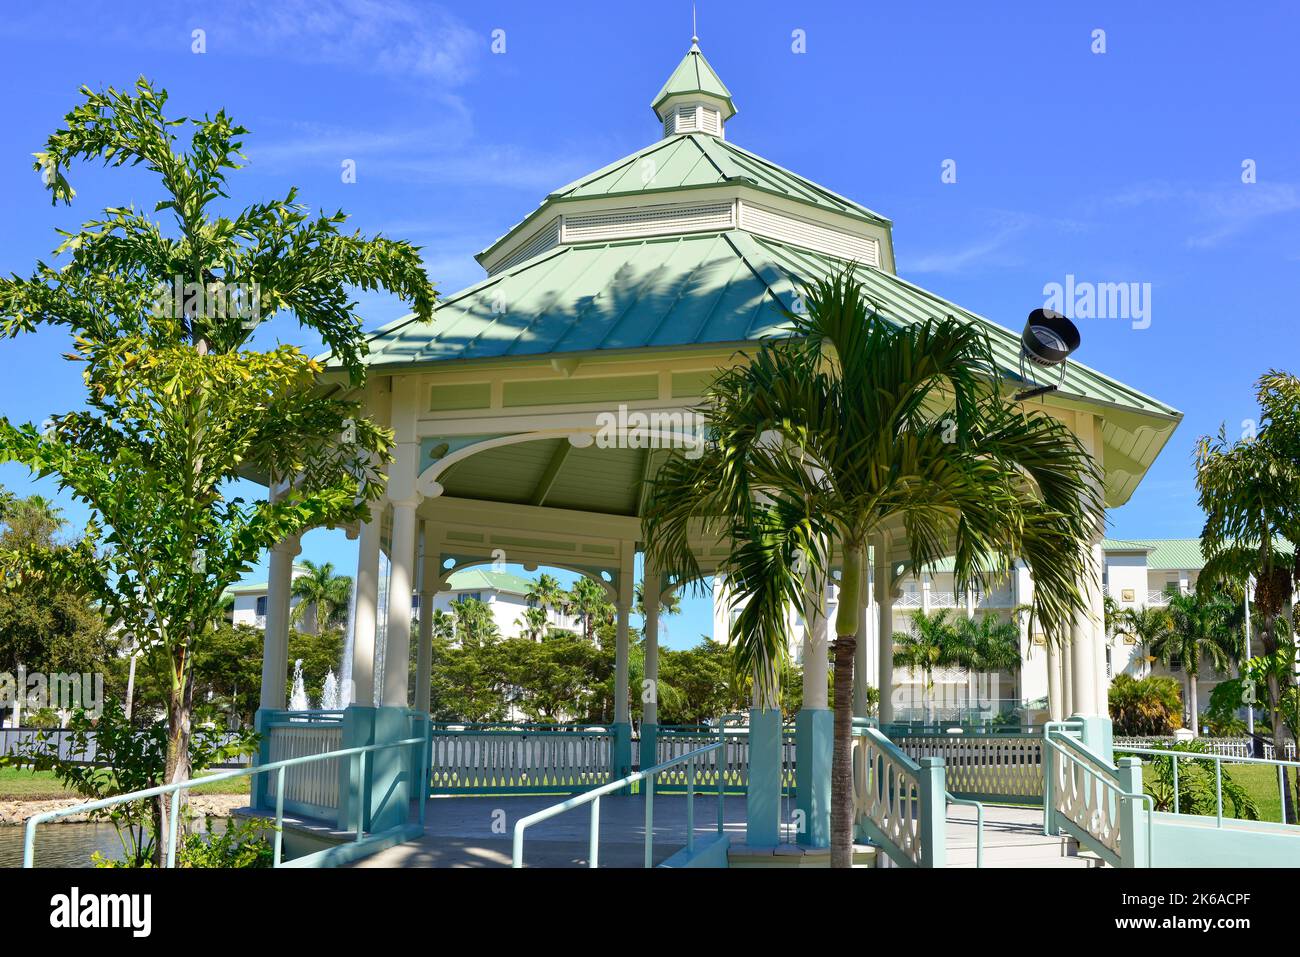 A charming gazebo with palms trees surround a lake with the Fountain of Freedom, remembering the Veterans in Laishley Park in Punta Gorda, FL, USA, Stock Photo